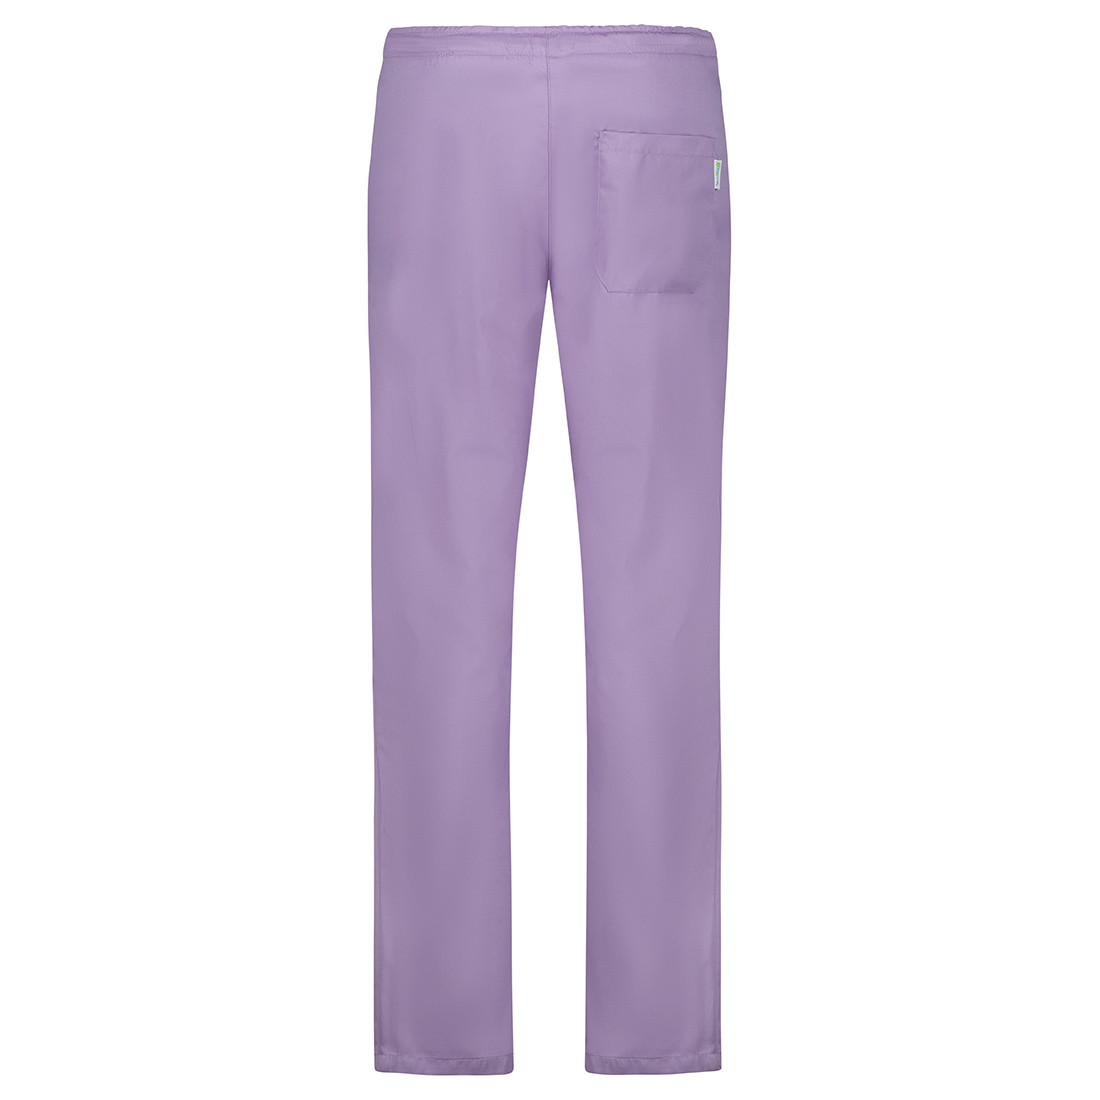 ALESSI Unisex medical trousers - Safetywear